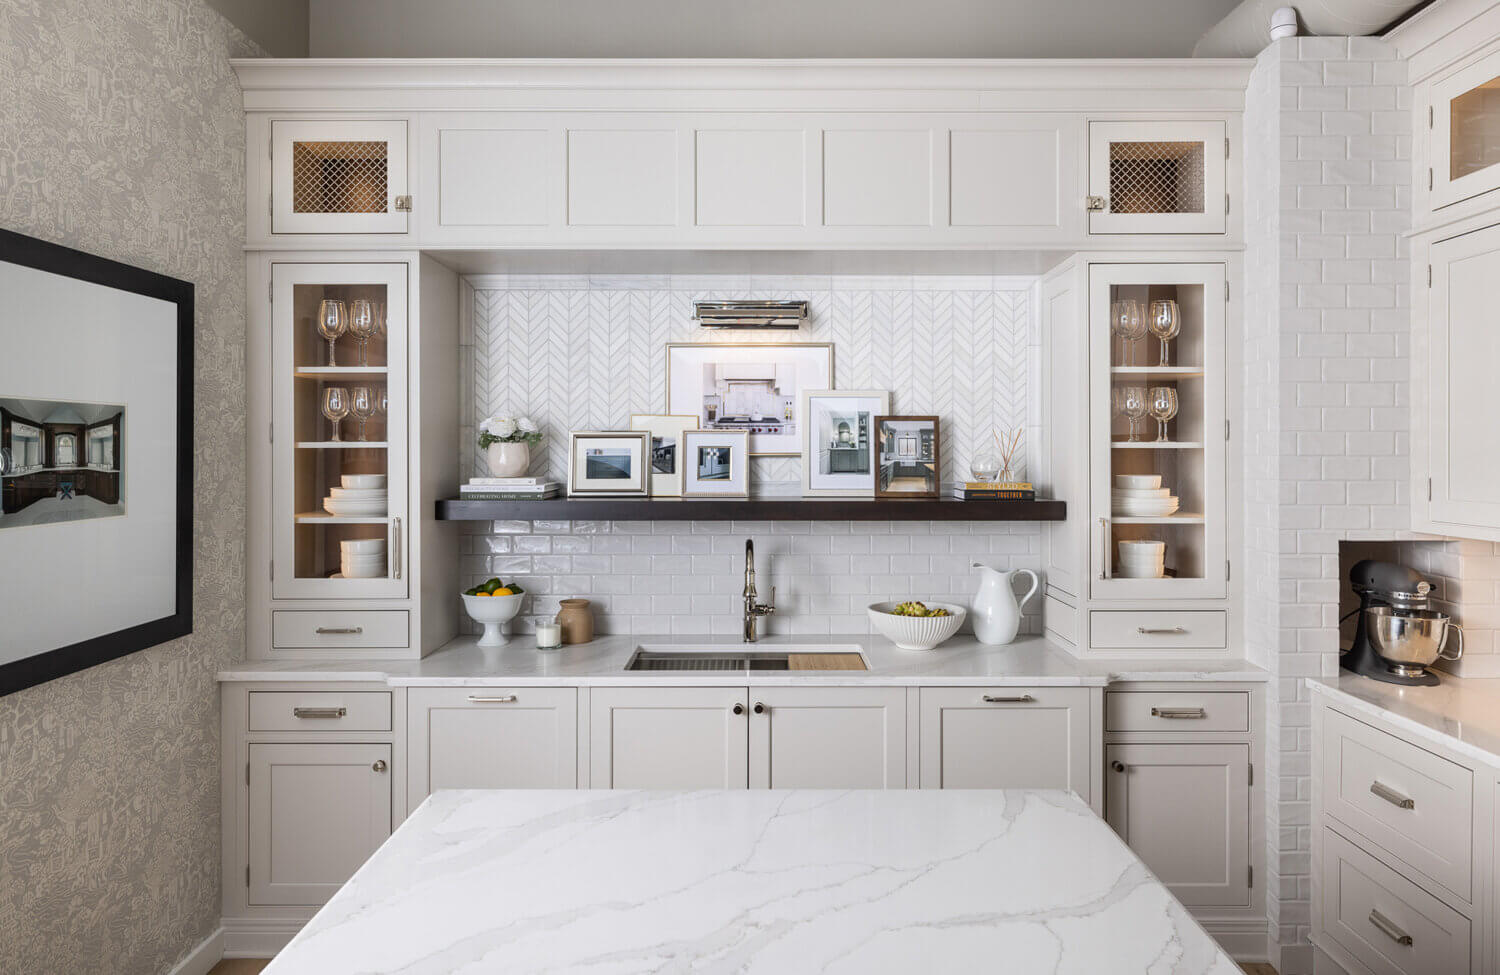 Every inch in this inset kitchen features well-thought-out storage solutions.